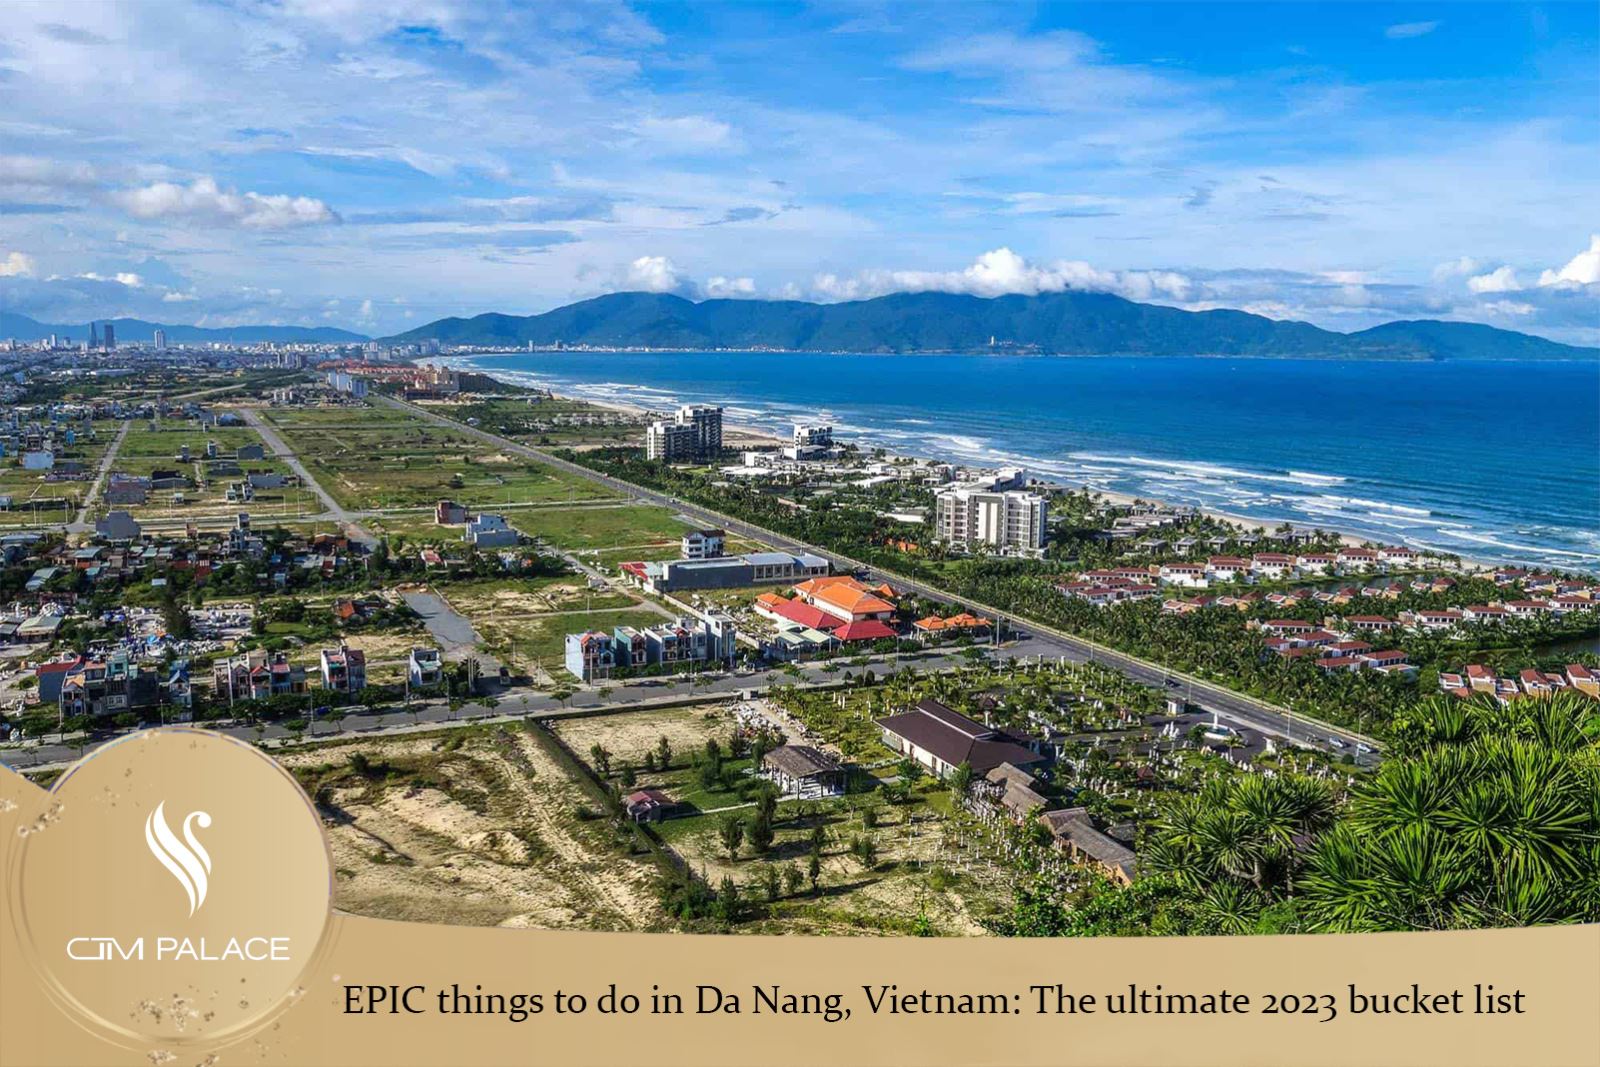 EPIC things to do in Da Nang, Vietnam: The ultimate 2023 bucket list